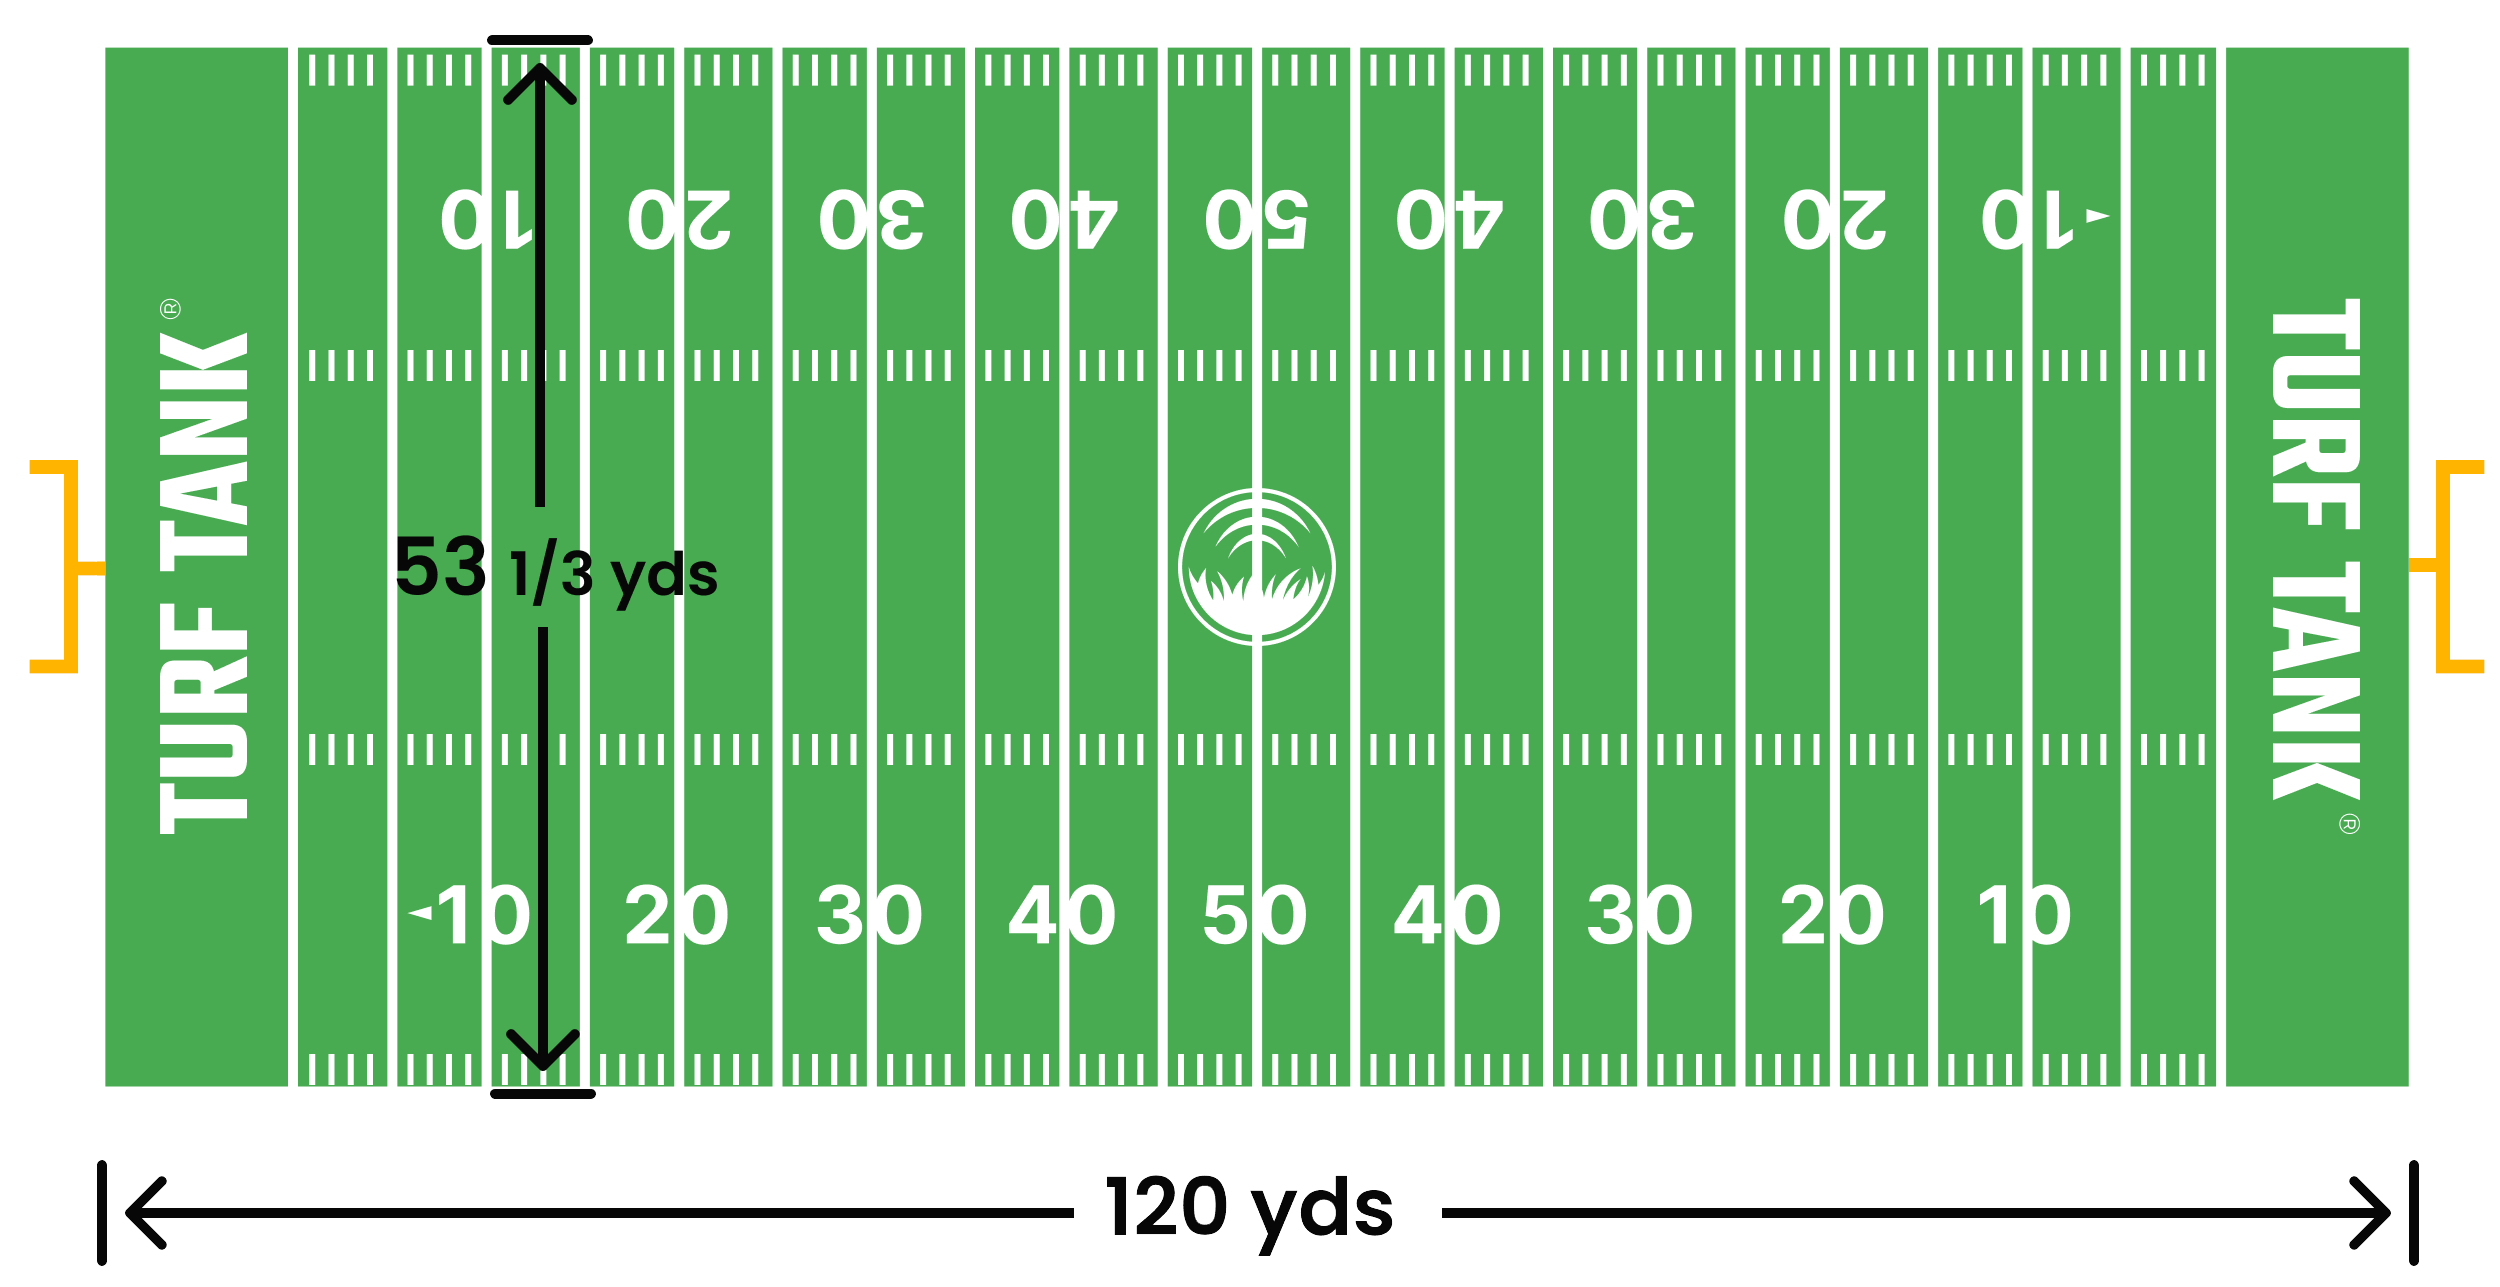 verdrietig Motiveren Oost How big is a Footbal field? | Find all dimensions for a field here